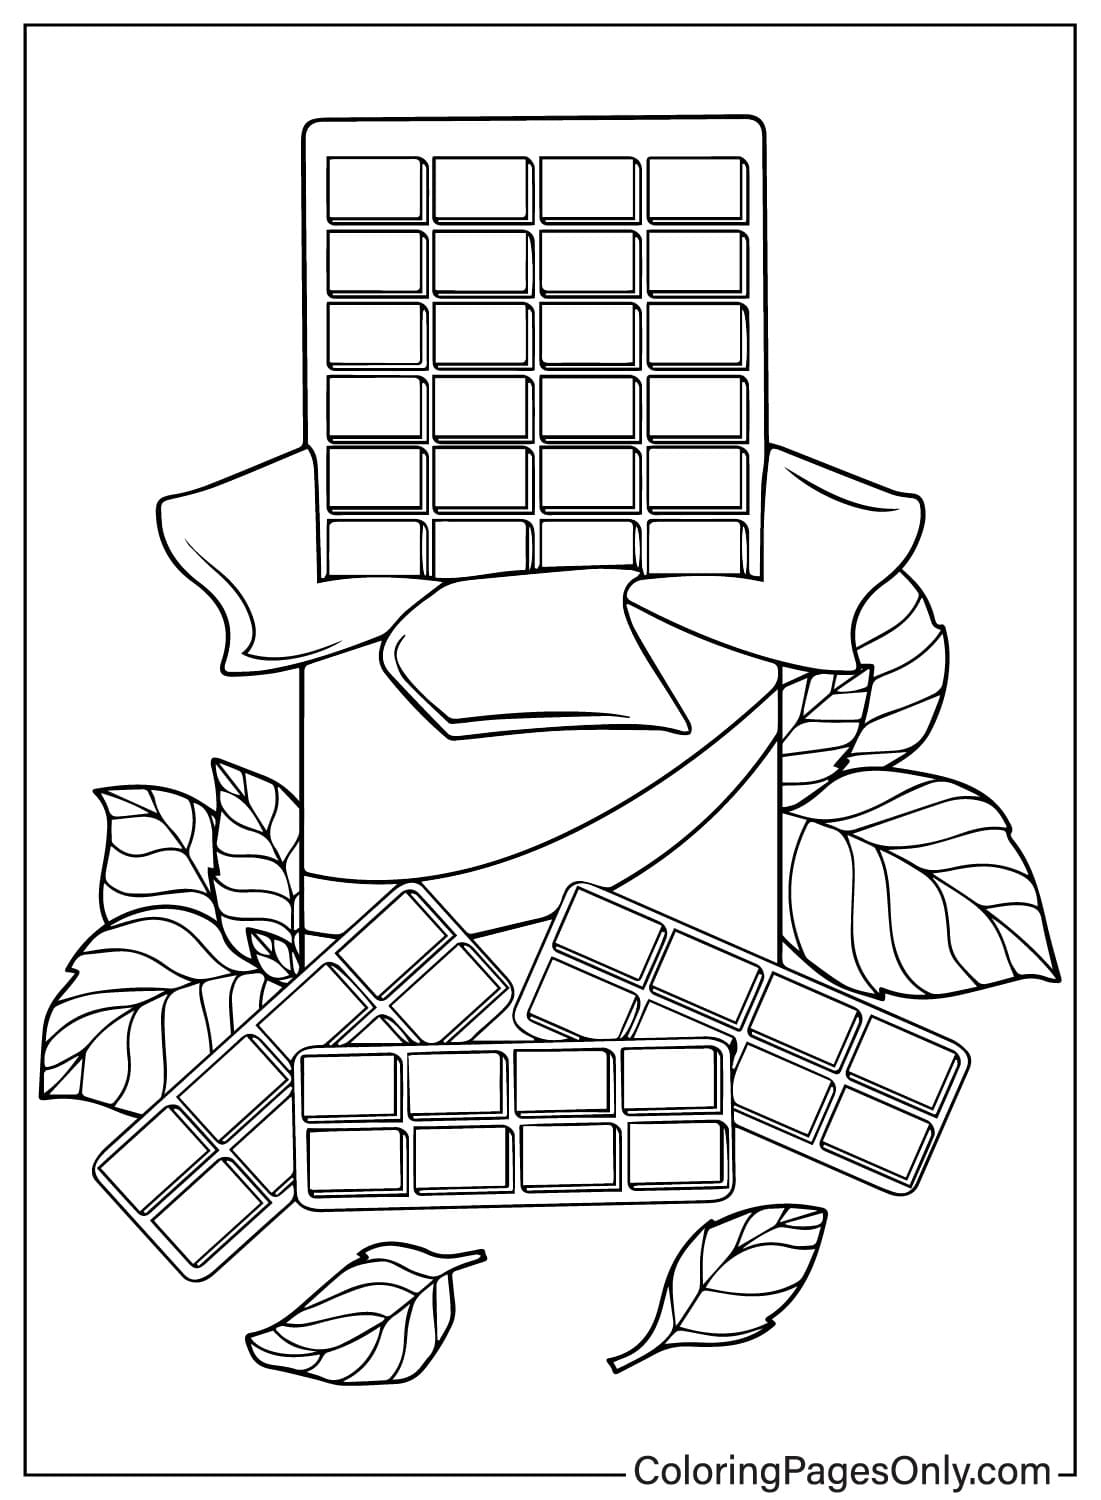 Chocolate Coloring Page Free Printable from Chocolate